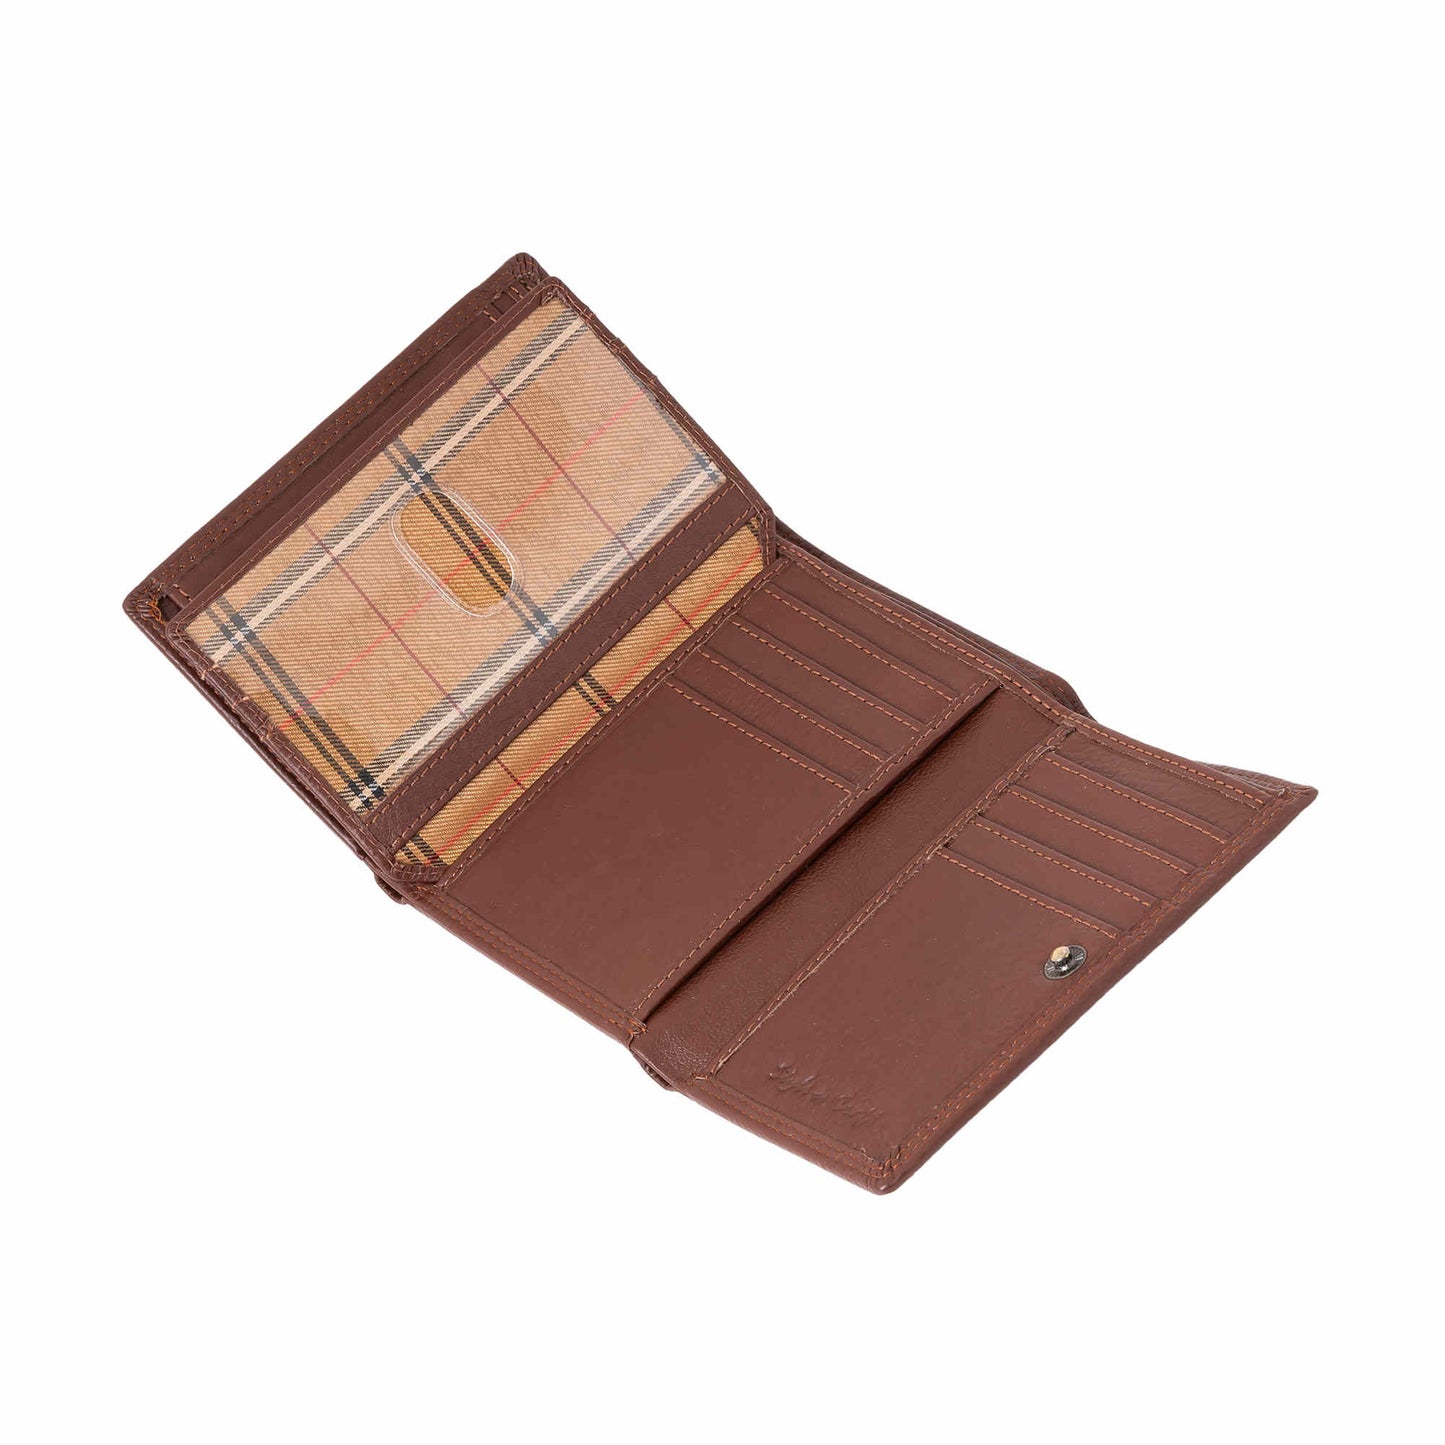 Style n Craft 391109 Ladies Trifold Brown Leather Wallet with Snap Button Closure - Open View 2 - Showing the Credit Card Pockets under the Flap, ID Window and the Snap Button